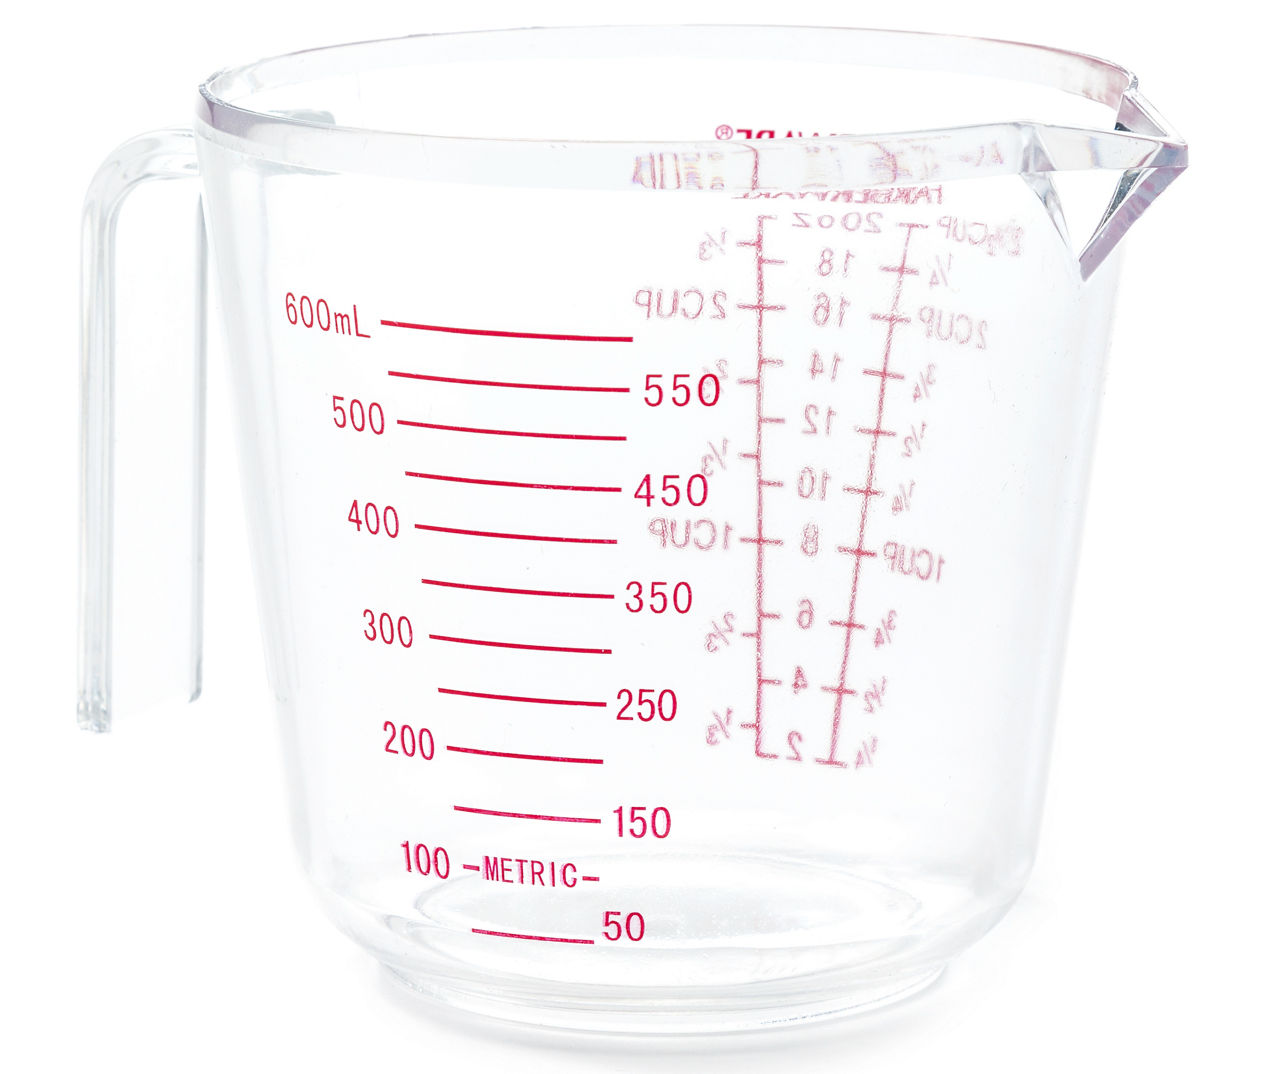 2.5 cup Plastic Measuring Cup